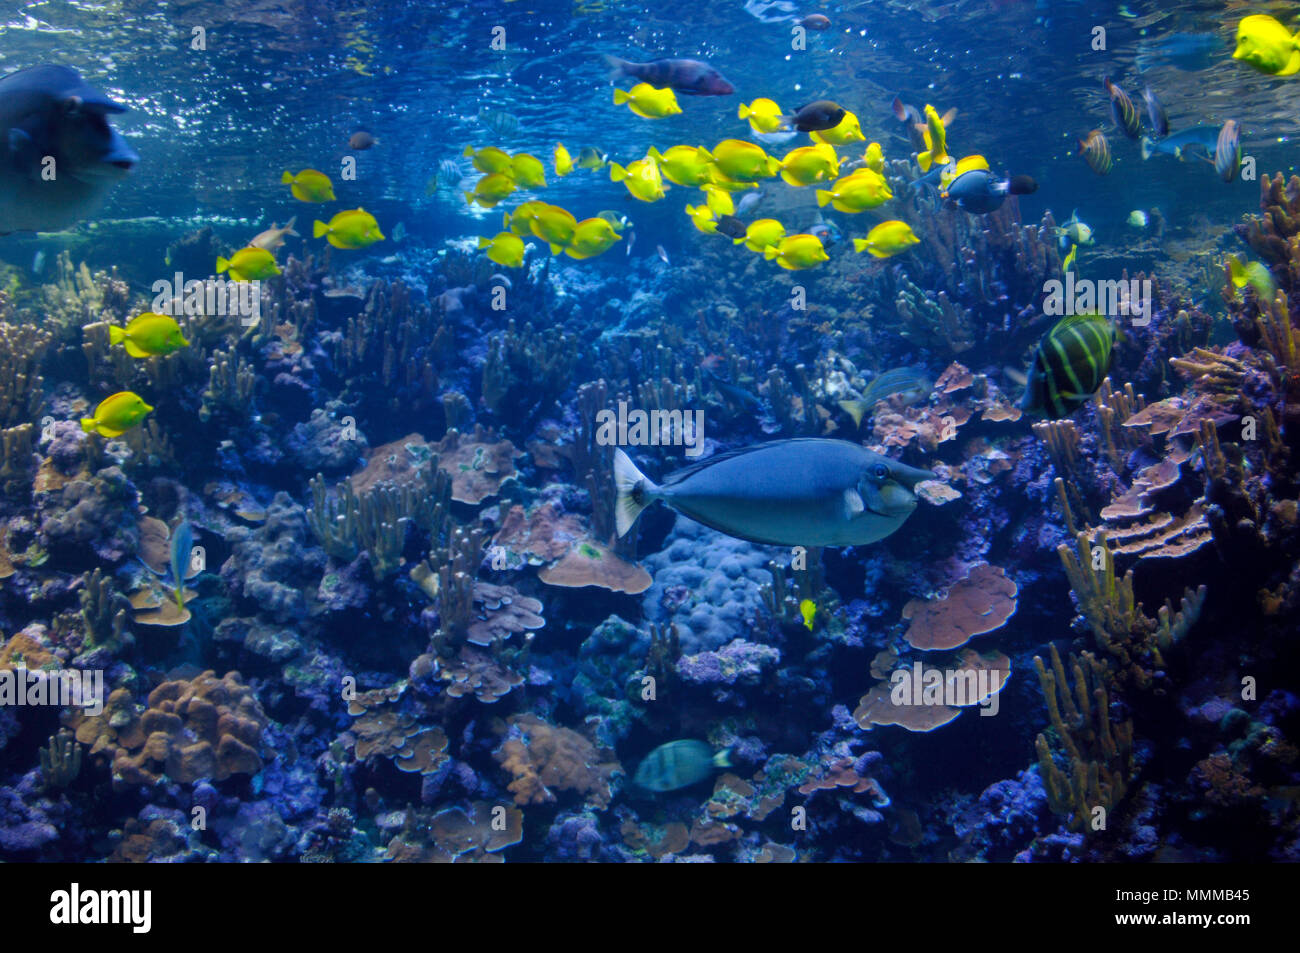 Hawaiian coral reef scene, with several yellow tangs, Zebrasoma flavescens, on display at the Maui Ocean Center, Maui, Hawaii, USA Stock Photo